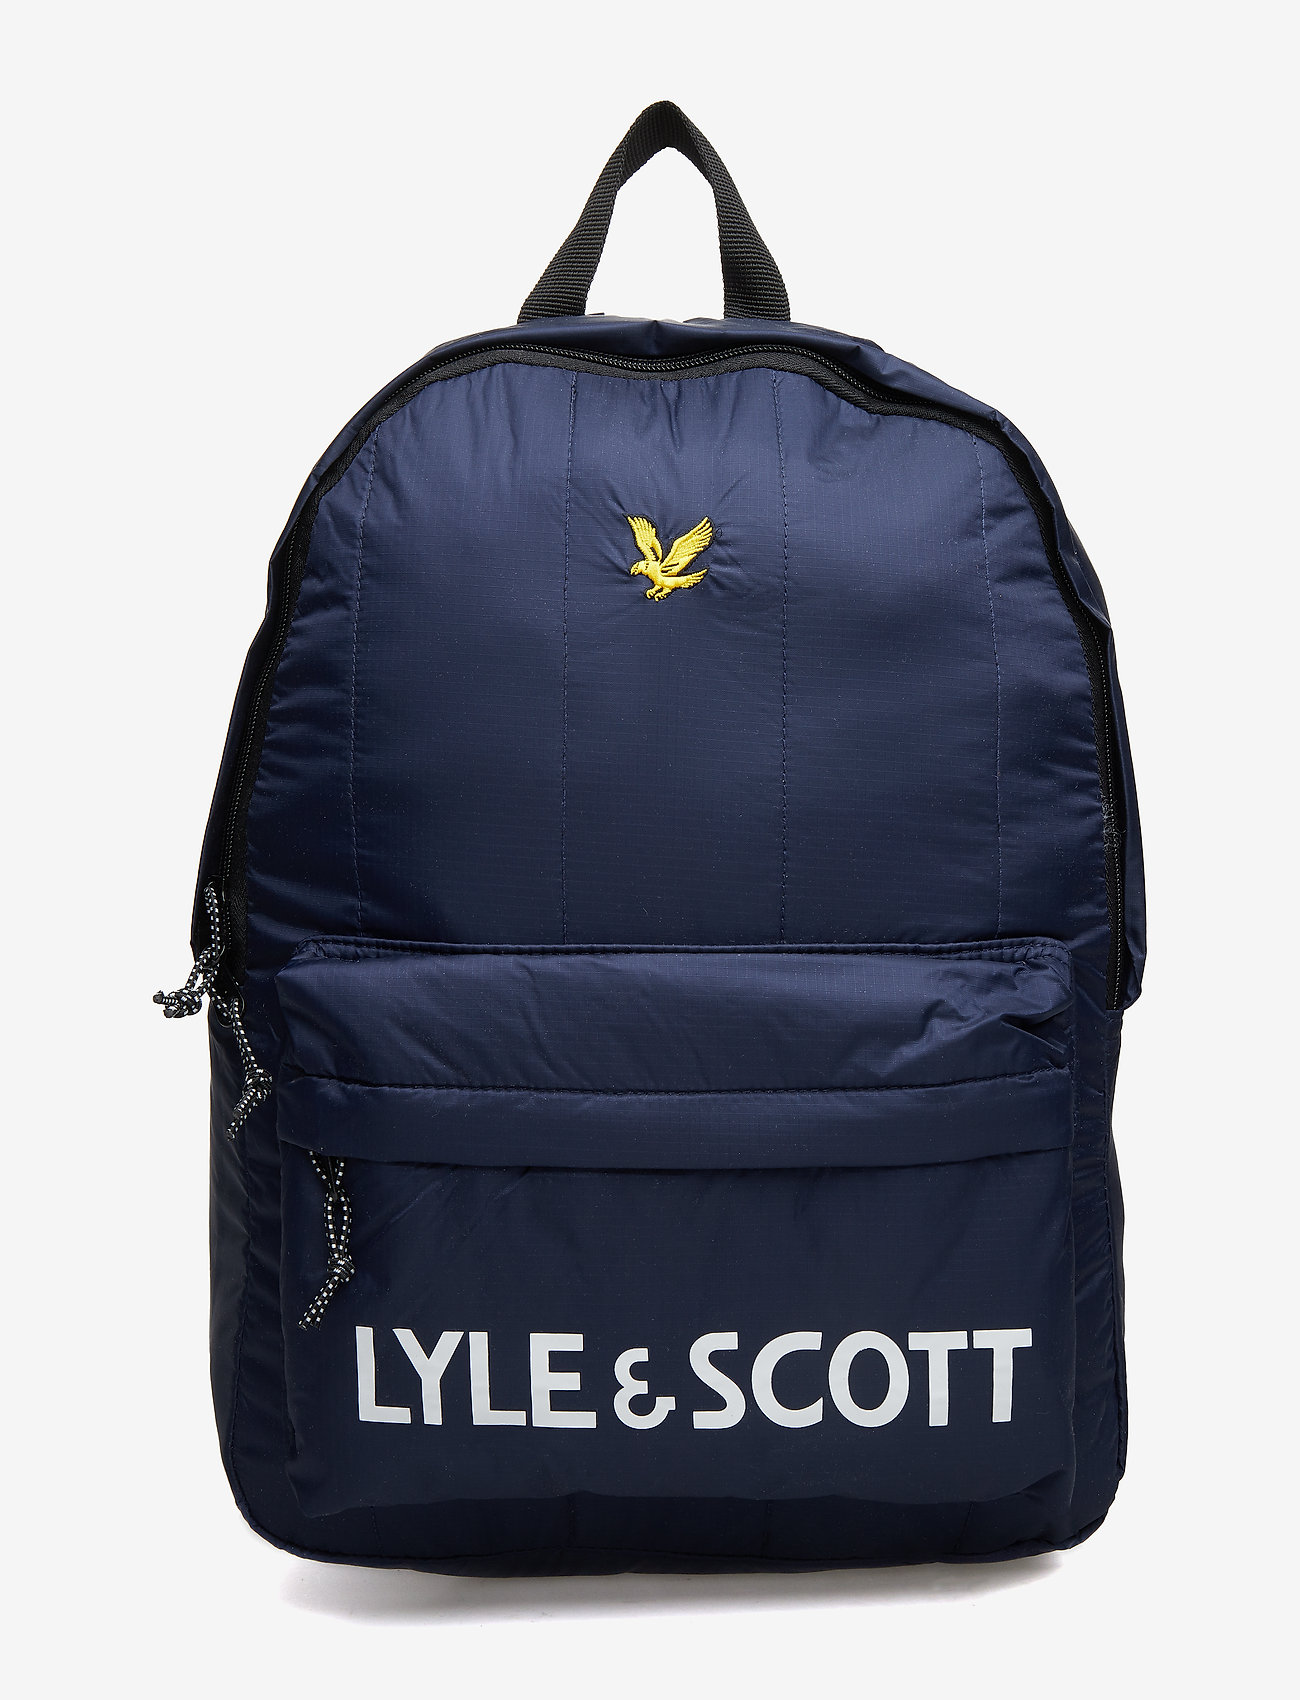 Lyle Backpack Black Top Sellers, SAVE 47% - horiconphoenix.com